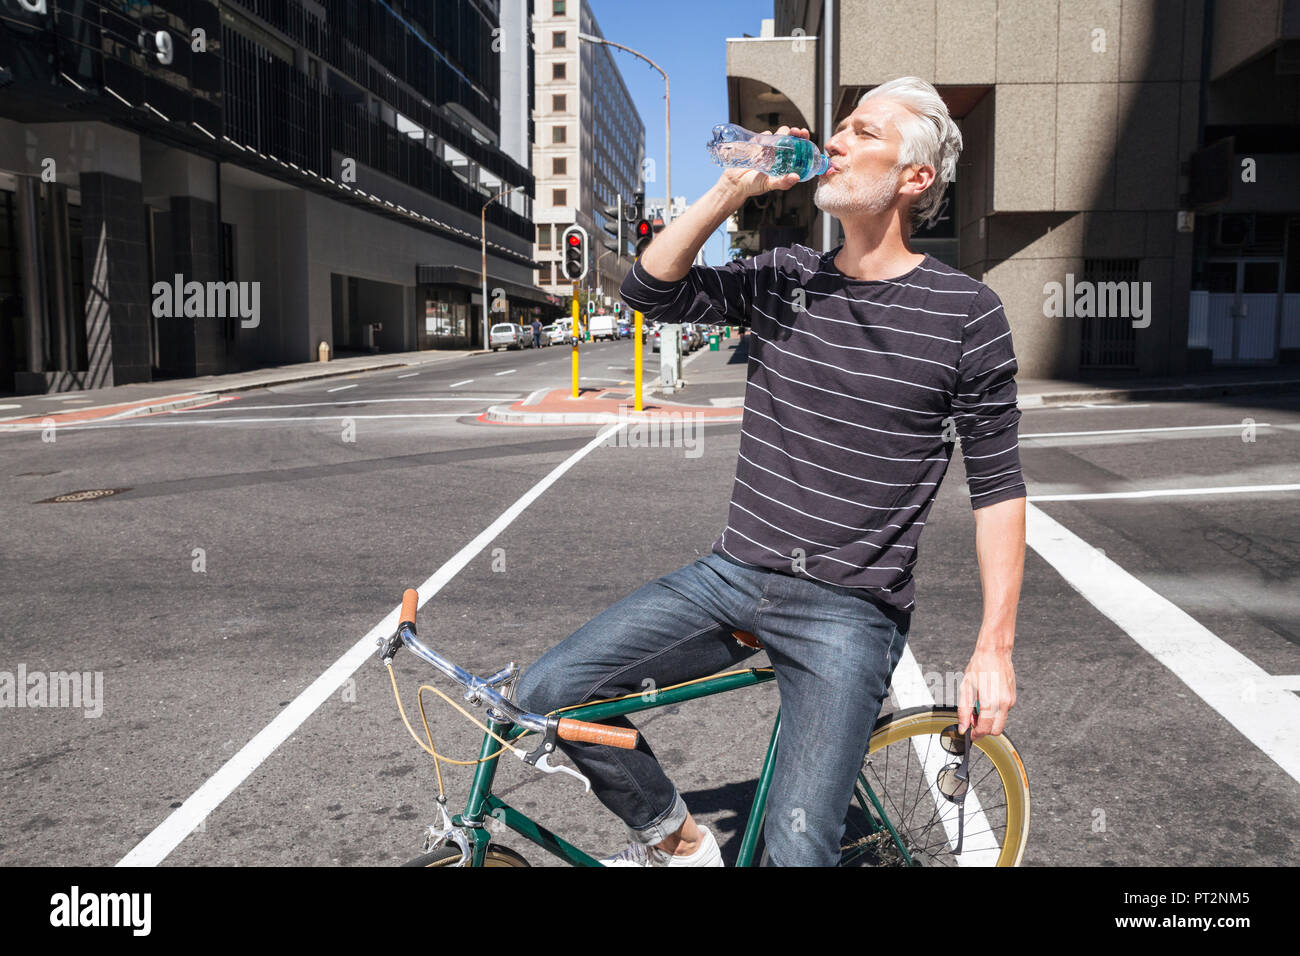 Man on bicycle drinking water Stock Photo